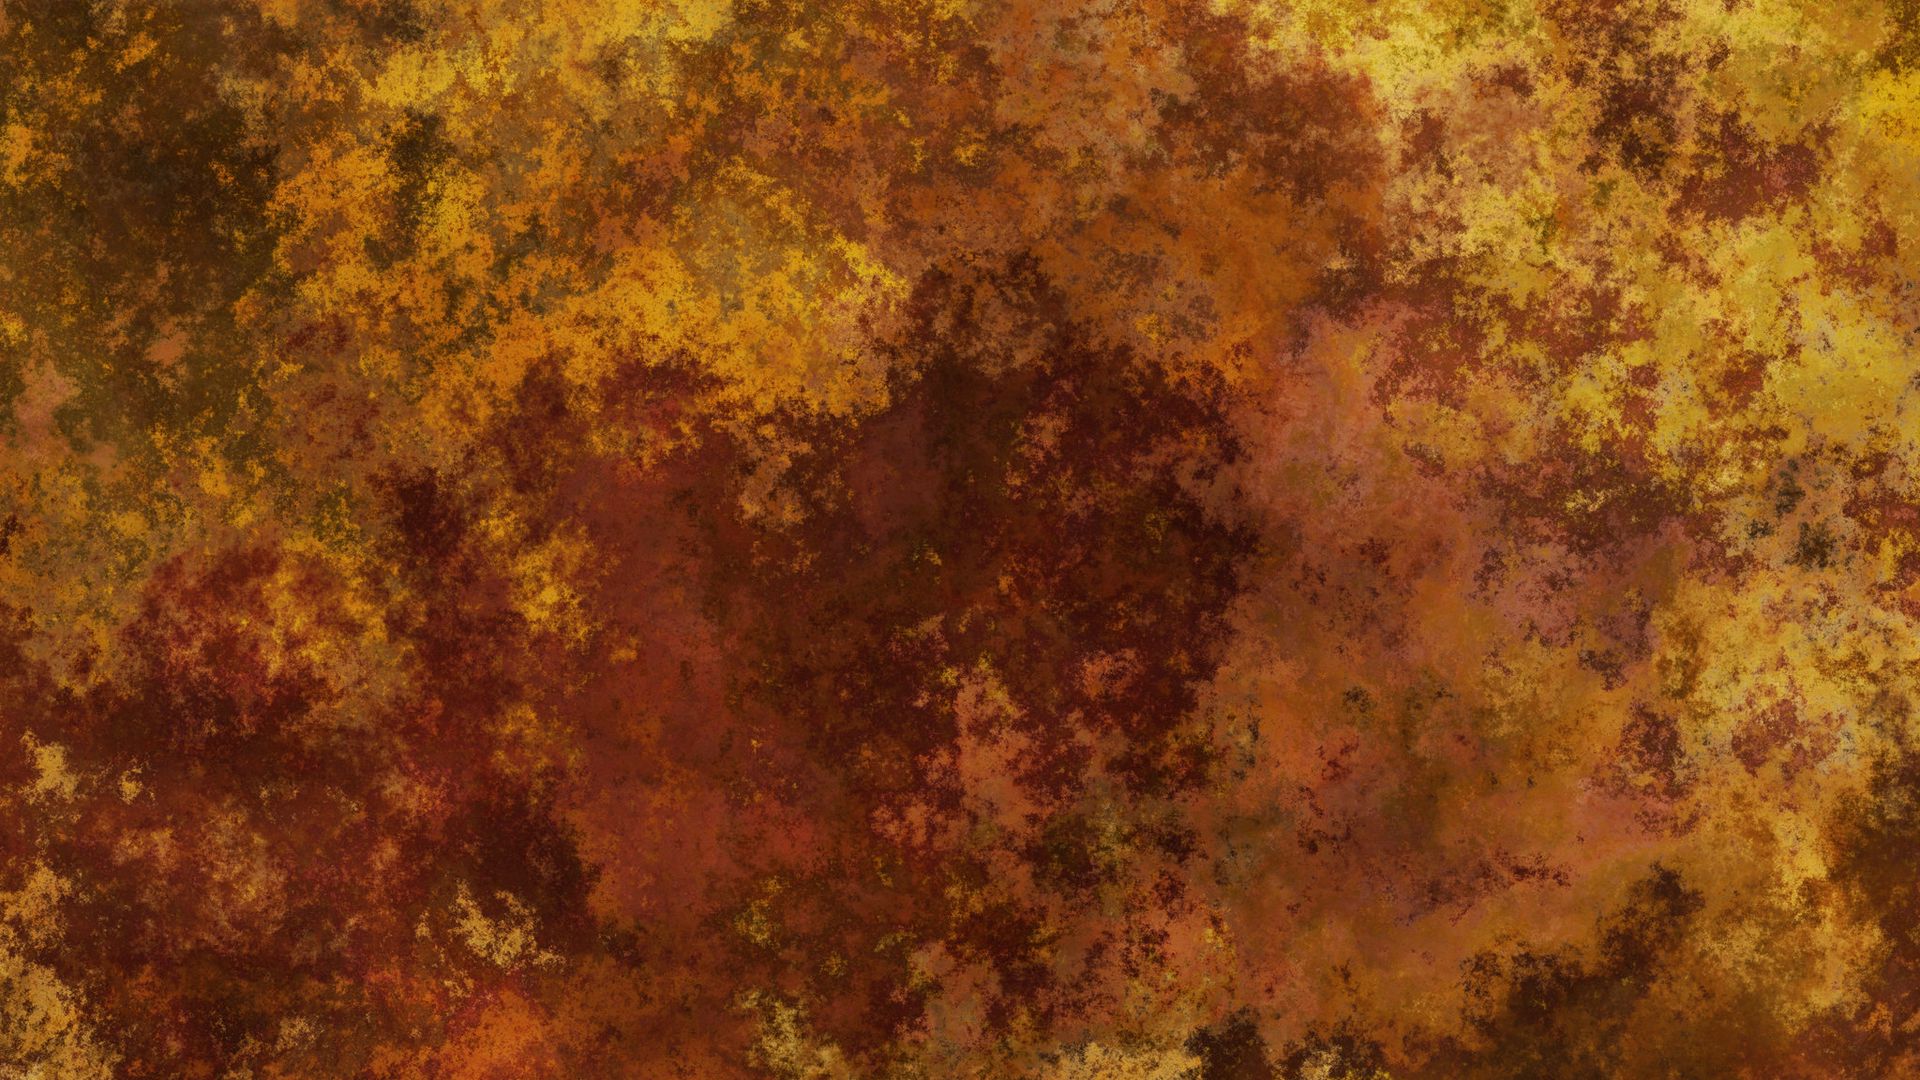 Download wallpaper 1920x1080 rust, surface, brown, texture full hd, hdtv,  fhd, 1080p hd background